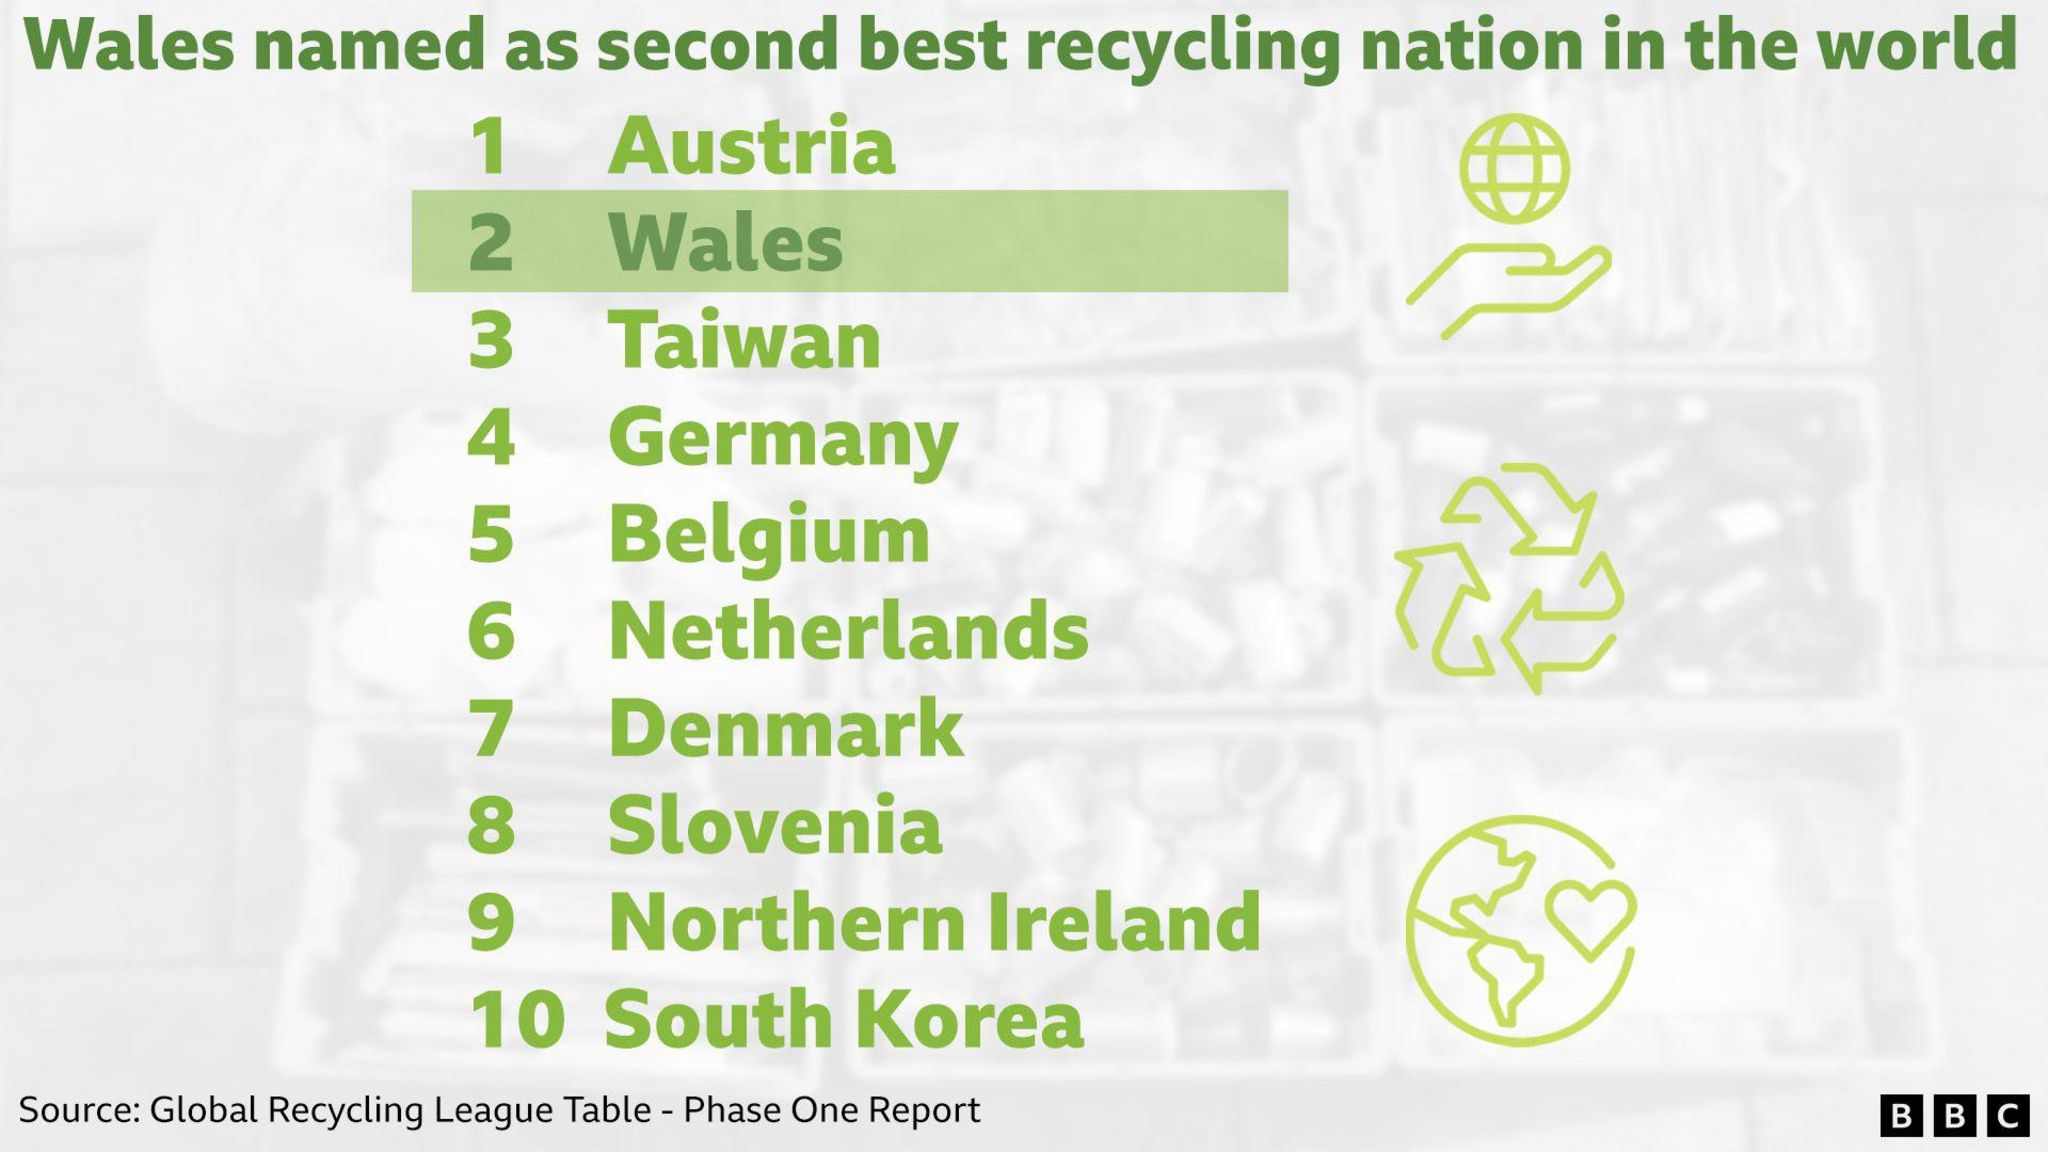 Top 10 recycling nations